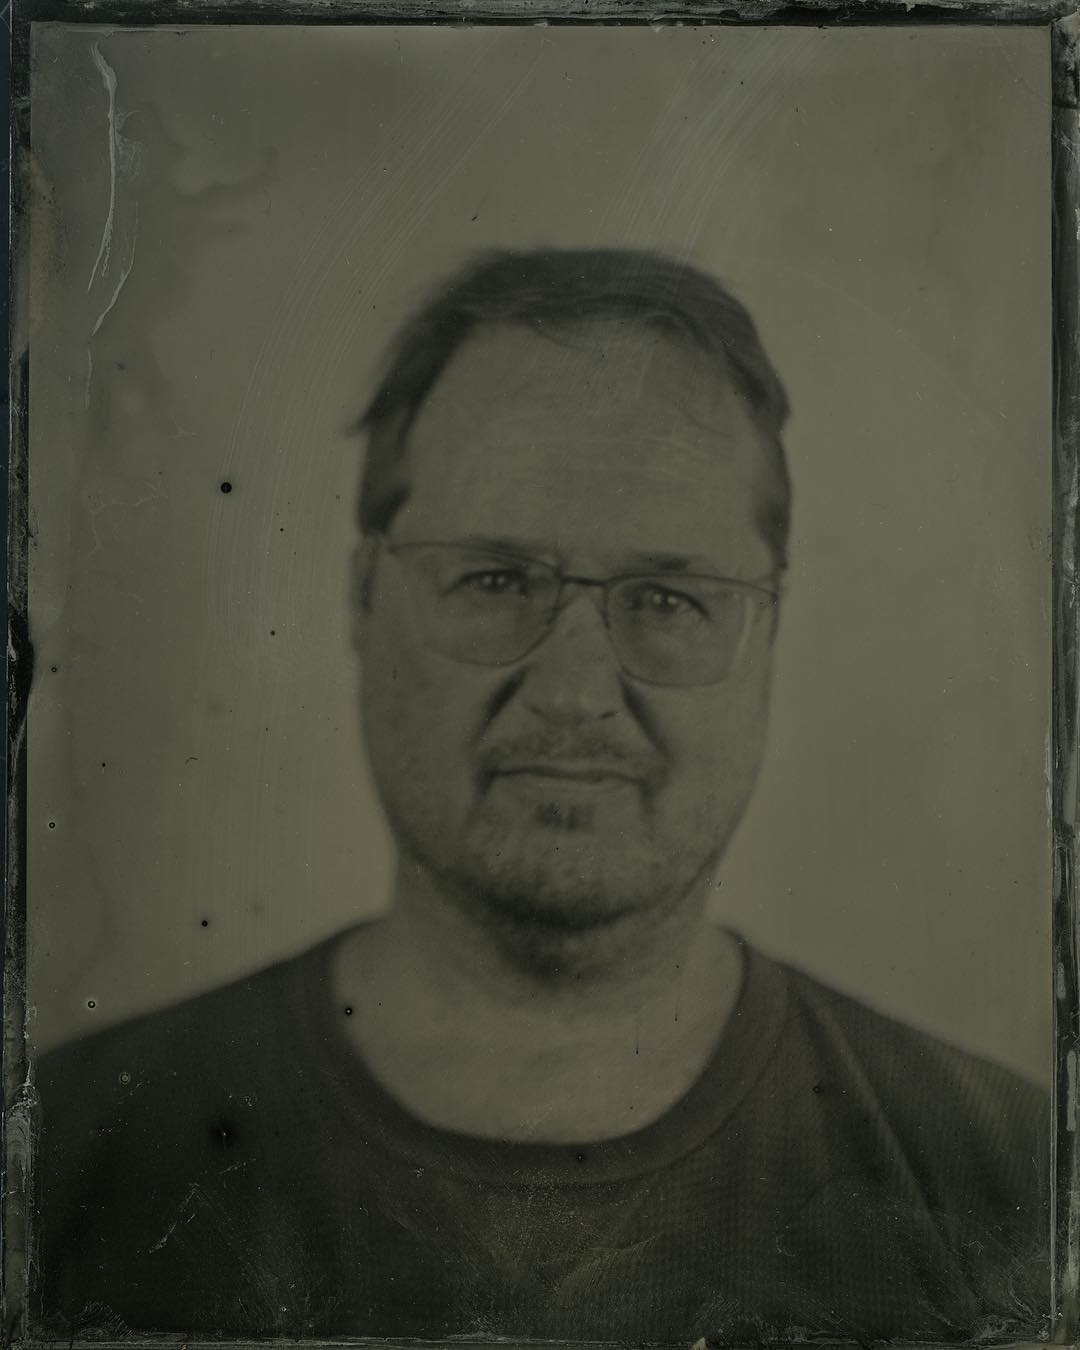 Selfie.

Our first assignment in the wet plate collodion workshop @penumbrafoundation this past weekend was to do a self-portrait.  My work partner for the day, @juliet2233, framed, focused, and tripped the shutter. The class, taught by @elmalayheehoo, was a blast. #wetplate #wetplatecollodion #tintype #iffilmisdeadmakeyourown #selfportrait